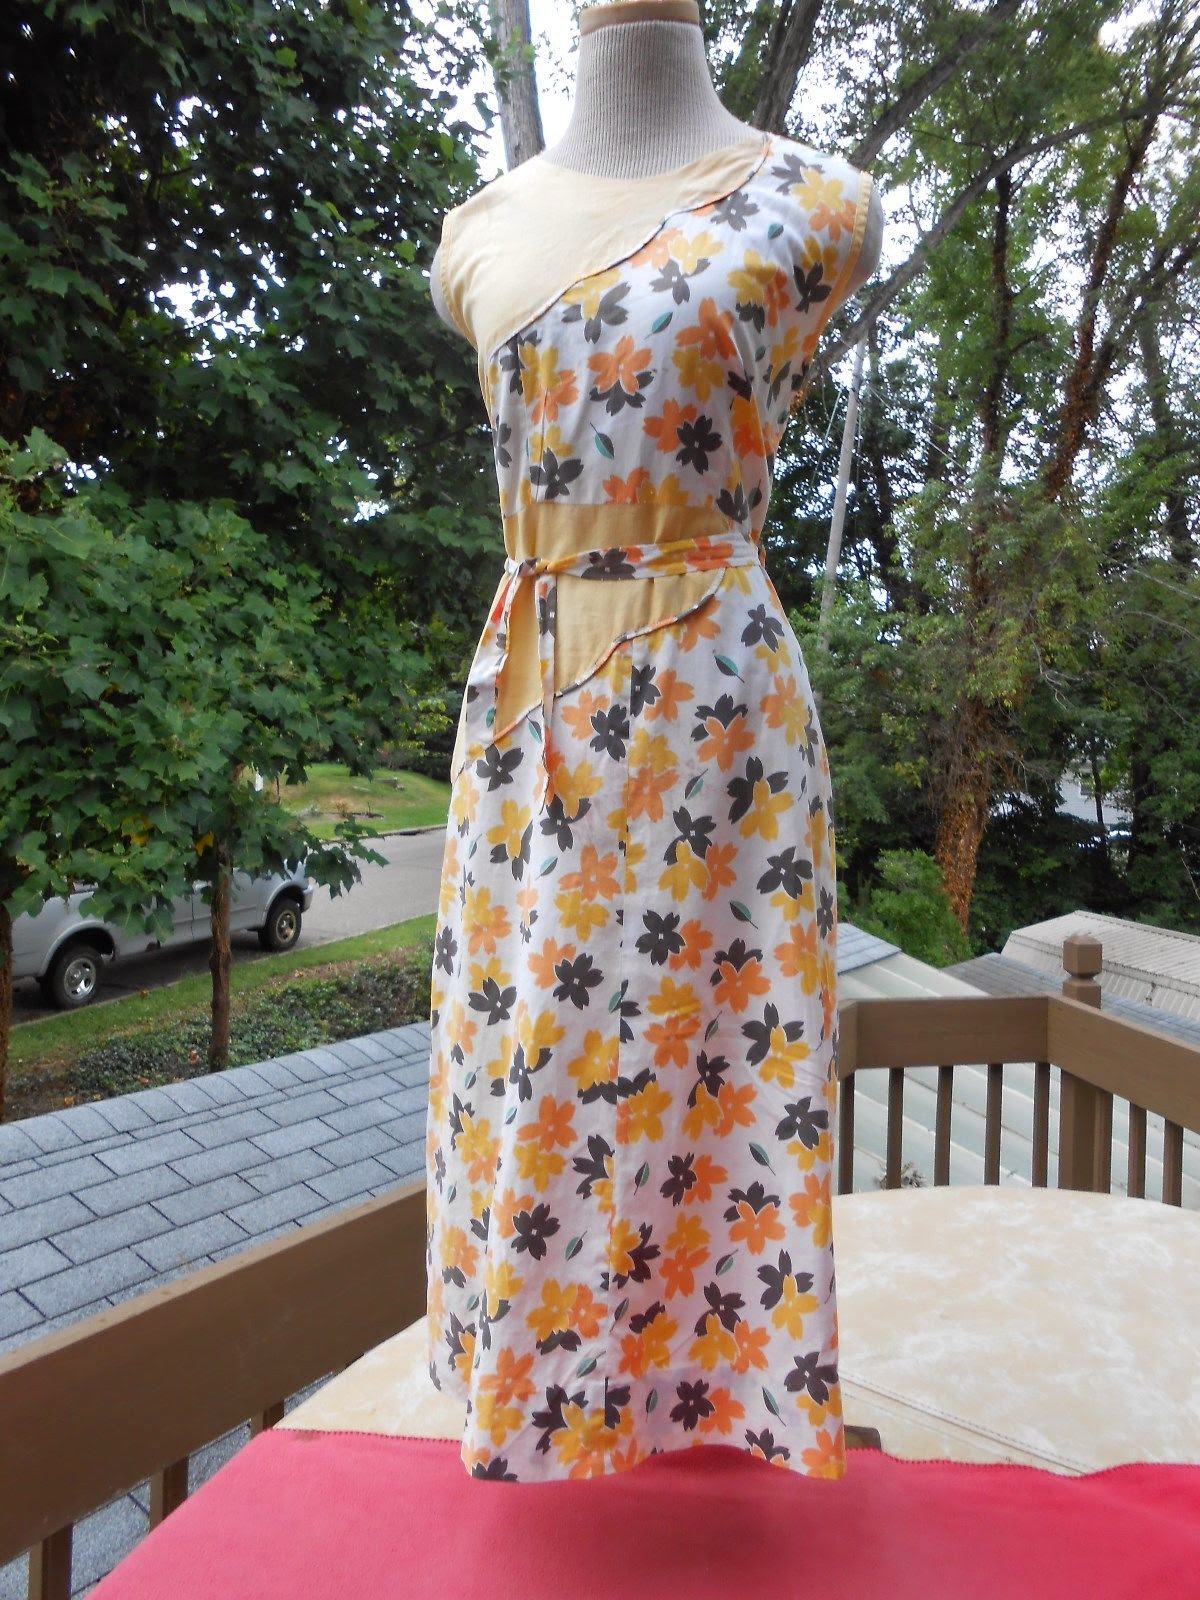 All The Pretty Dresses: 1930's Summer Floral Dress